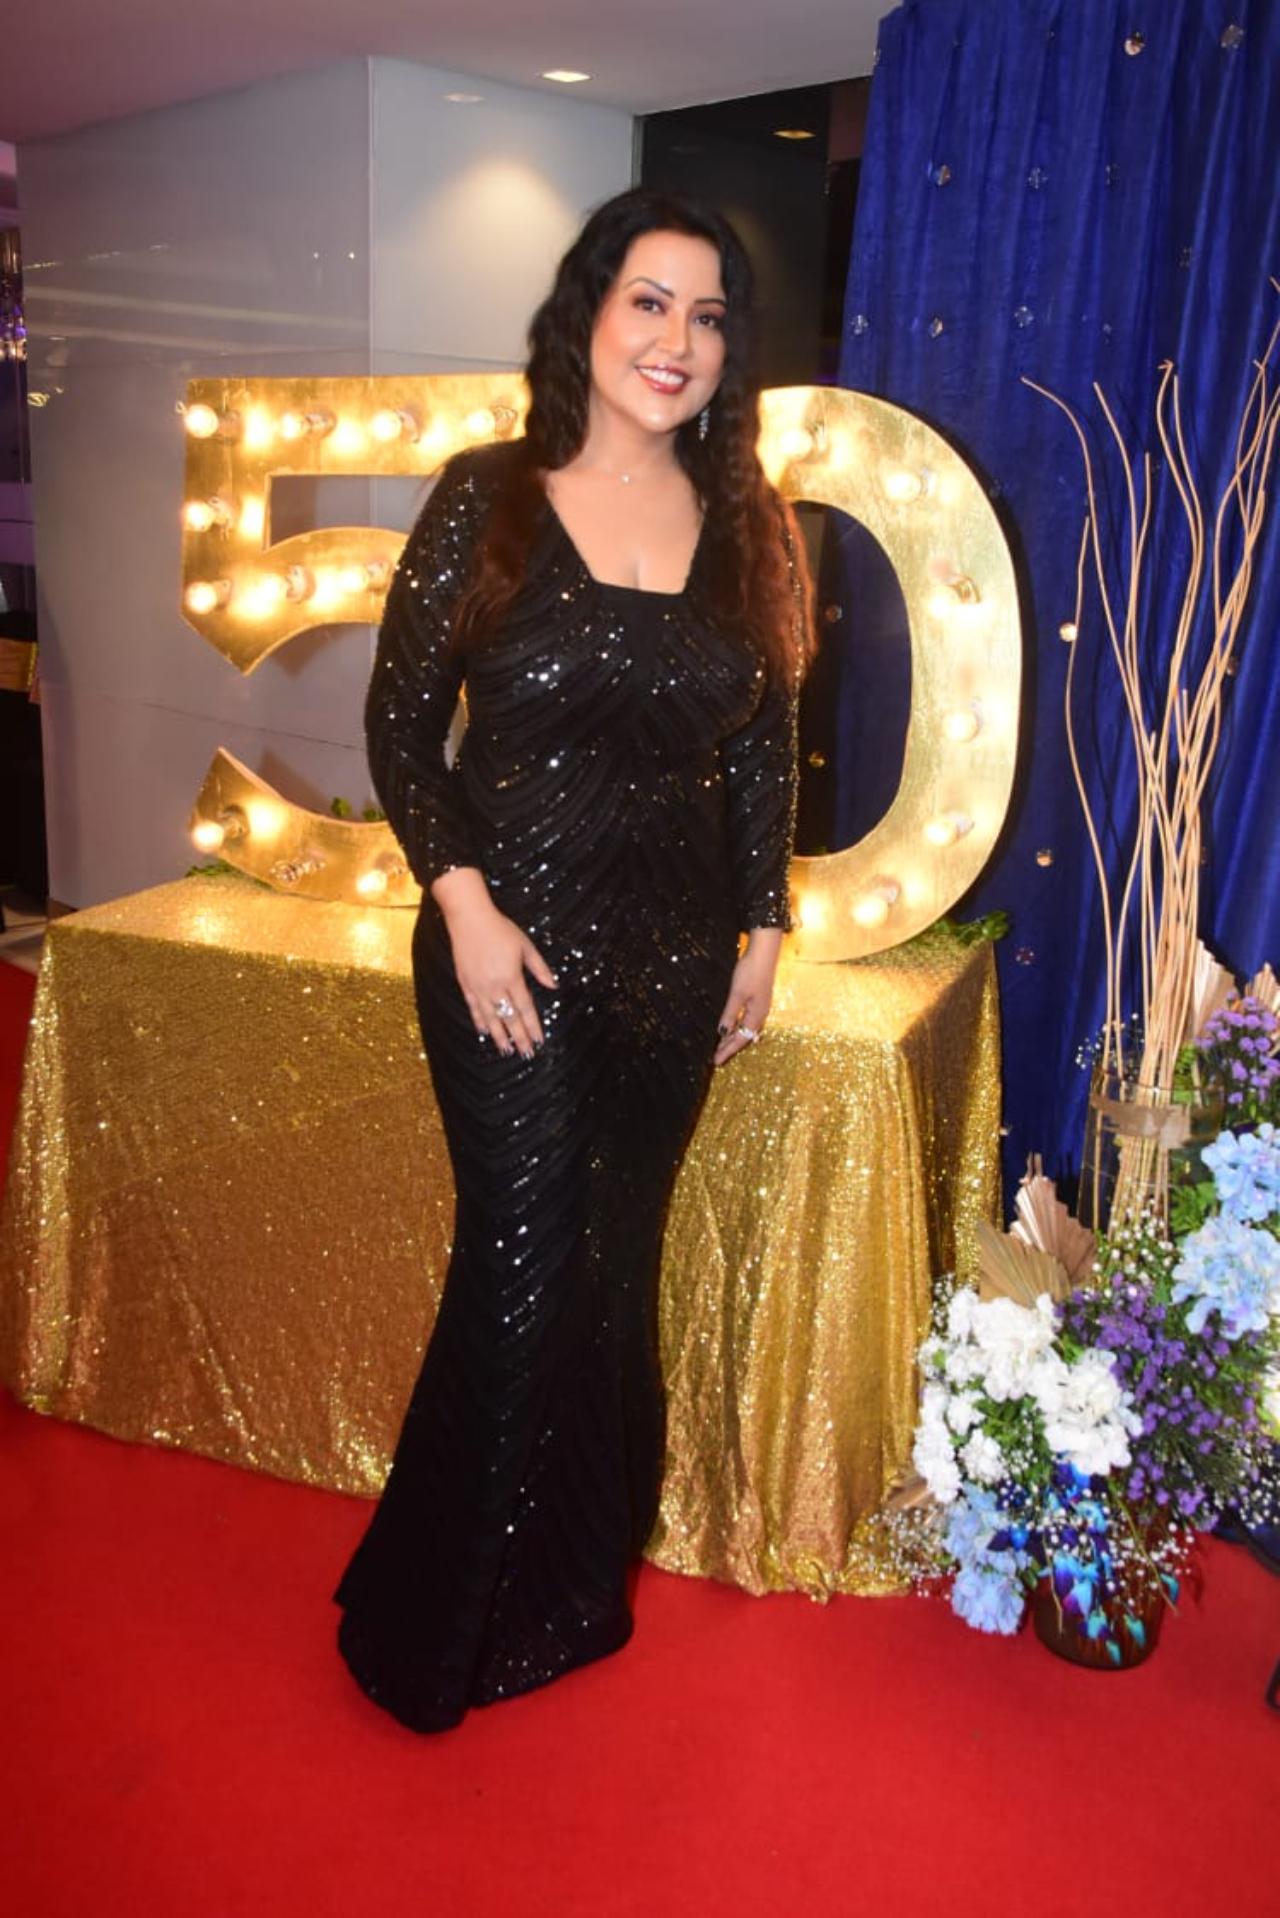 Other notable public figures also included Amruta Fadvanis who dazzled at the birthday gala in her glittery flowing black dress